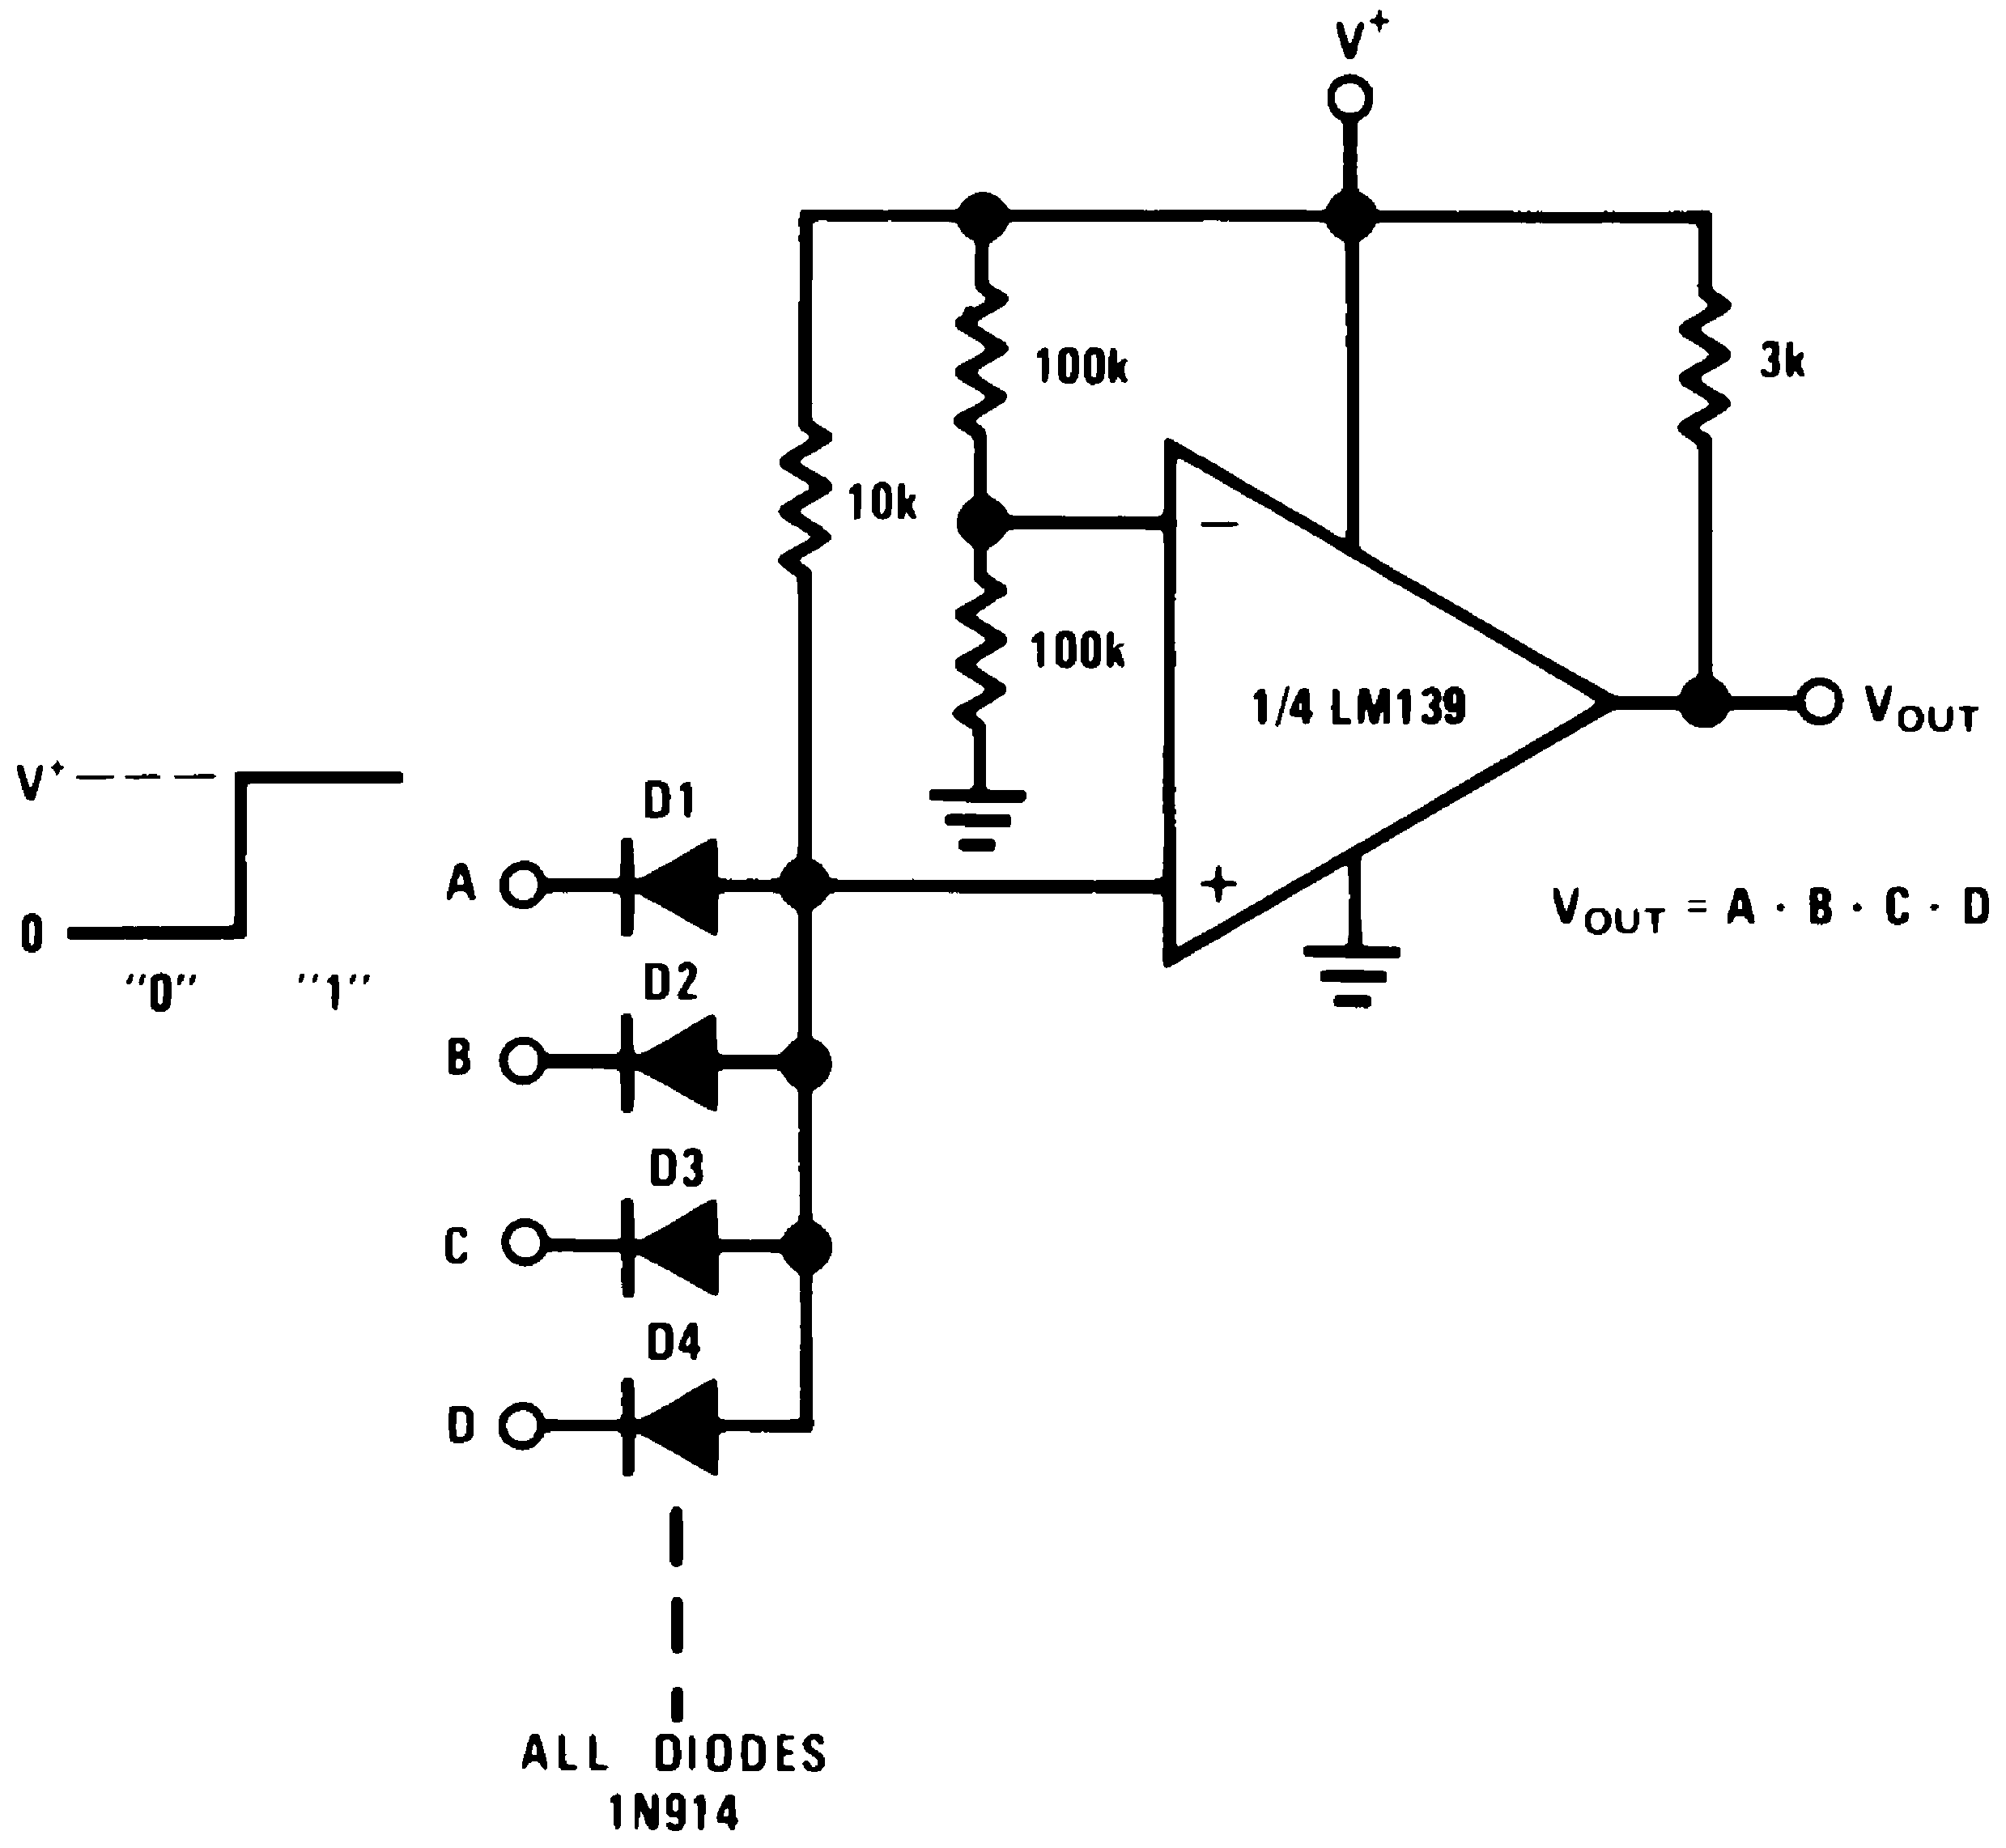 LM339-MIL lm339-mil-large-fan-in-and-gate-schematic.png